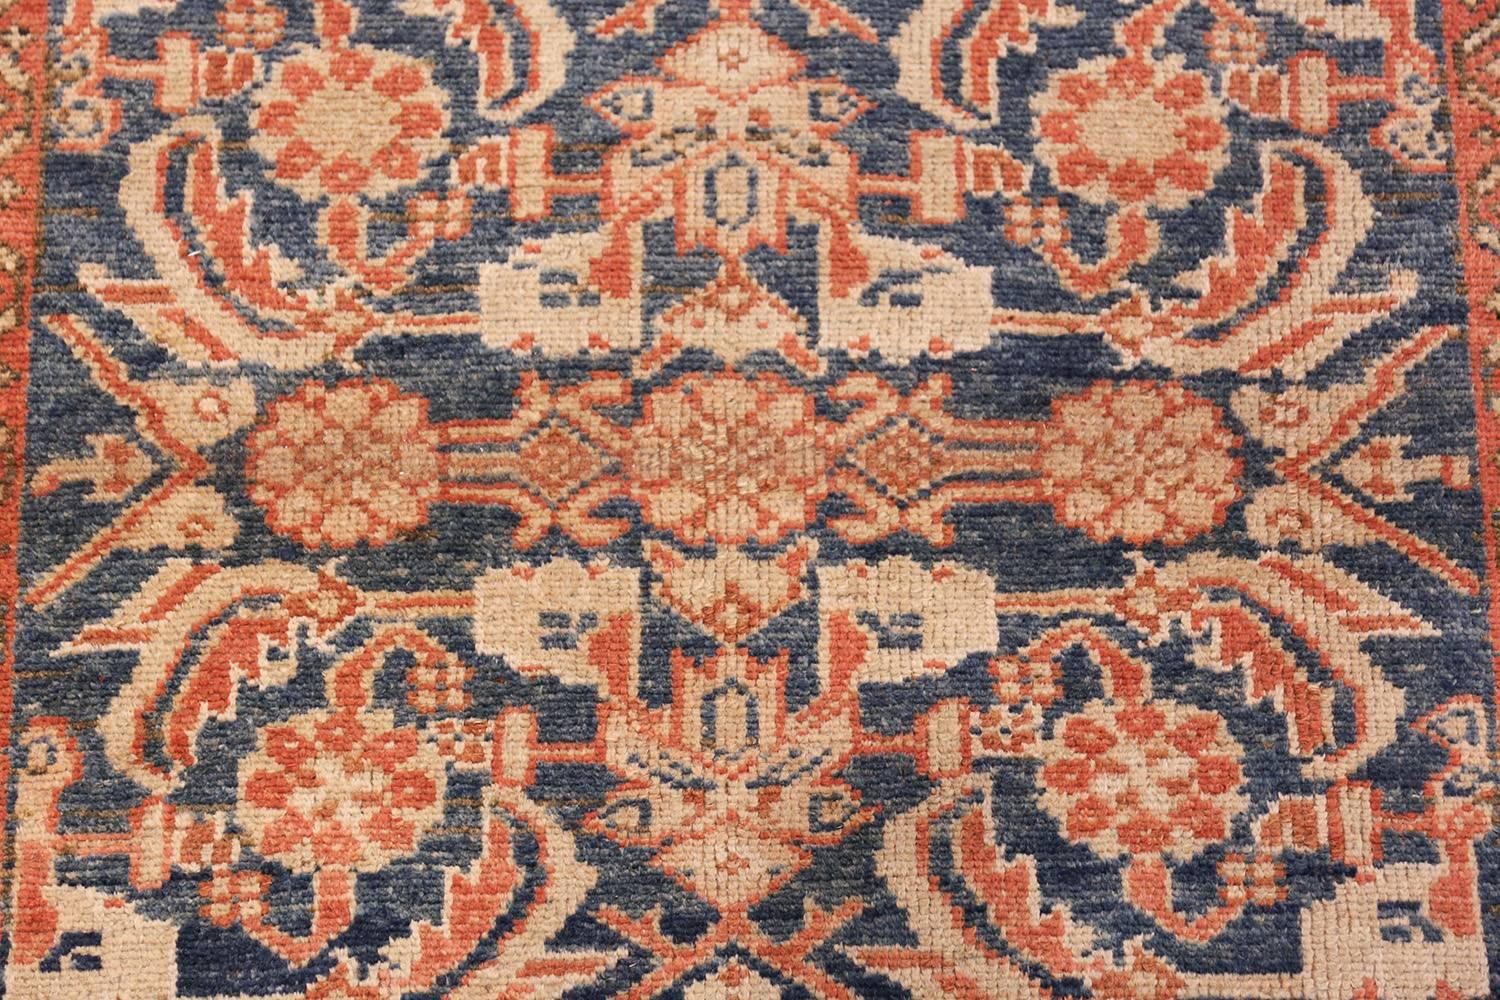 20th Century Antique Persian Malayer Hallway Runner Rug. Size: 3 ft 2 in x 16 ft 10 in 